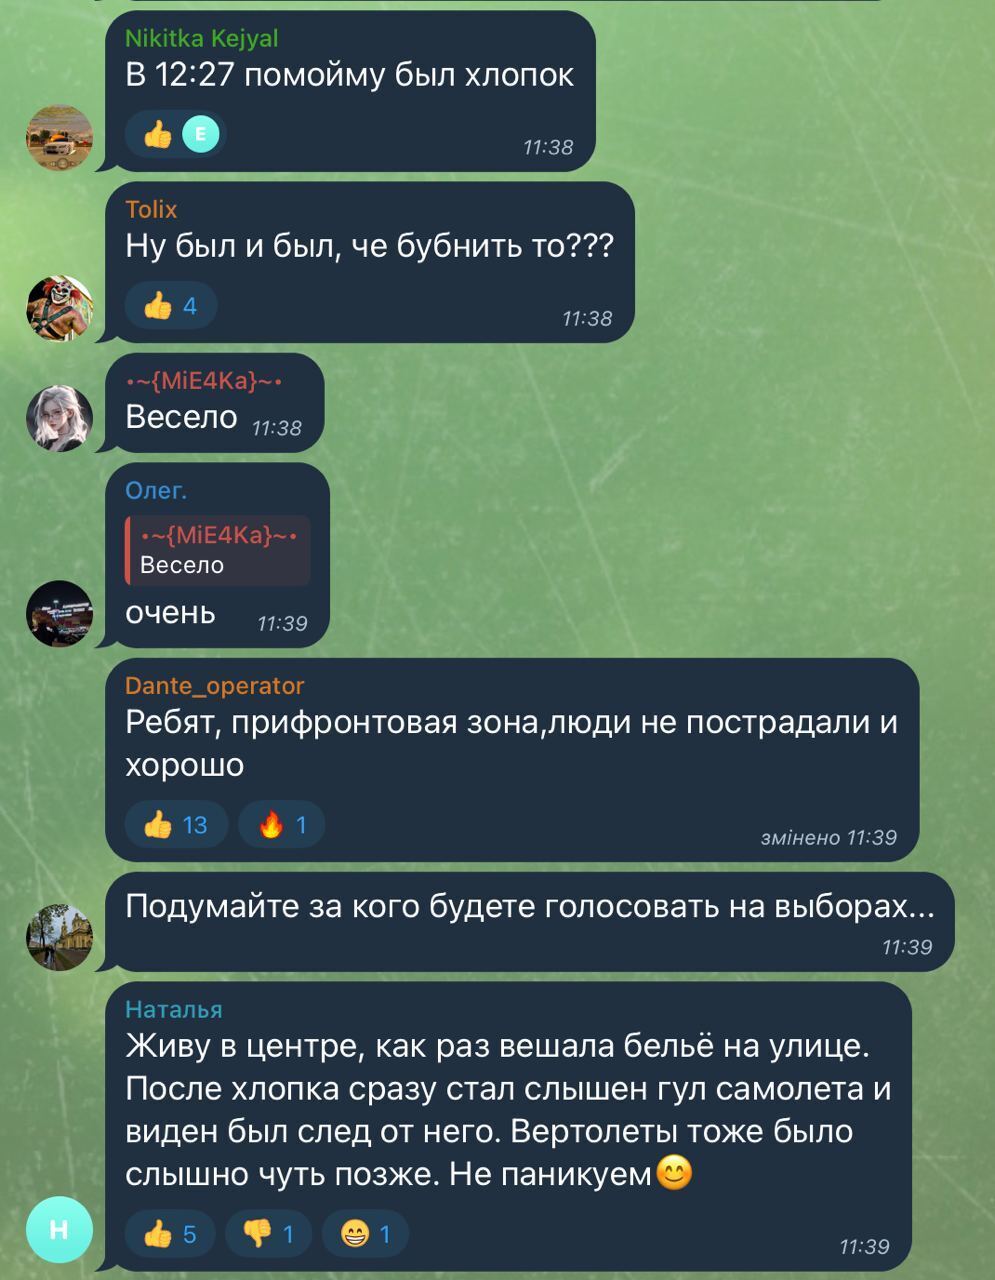 Discussion of the explosion in a Donetsk chat room